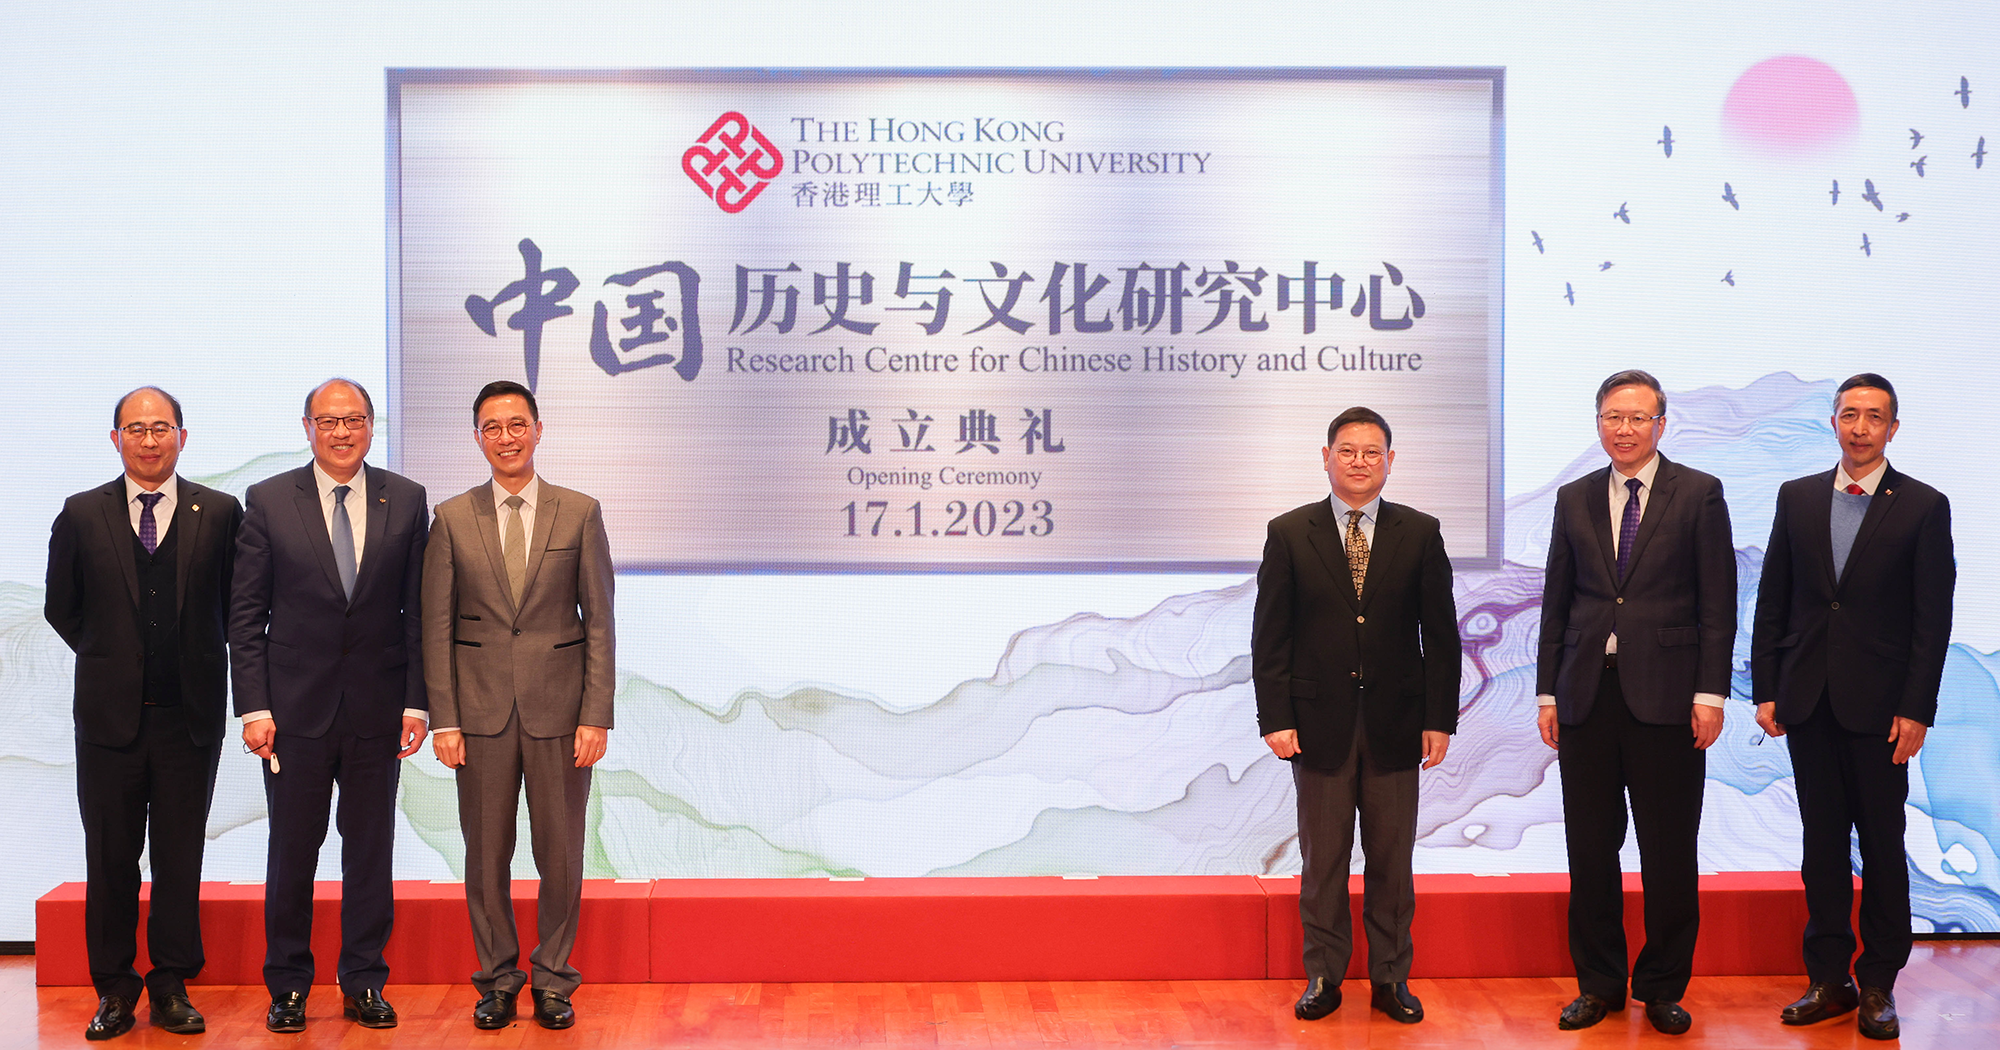 PolyU held the Opening Ceremony of the Research Centre for Chinese History and Culture on 17 January 2023. The ceremony was officiated by Mr Kevin Yeung Yun-hung, Secretary for Culture, Sports and Tourism (3rd from left), and Mr Zhang Guoyi, Deputy Director-General of the Department of Publicity, Cultural and Sports Affairs of the Liaison Office of the Central People’s Government (3rd from right). They were joined by Dr Lam Tai-fai (2nd from left), Prof. Jin-Guang Teng (2nd from right), Prof. Wing-tak Wong (1st from left), and Prof. Li Ping (1st from right).